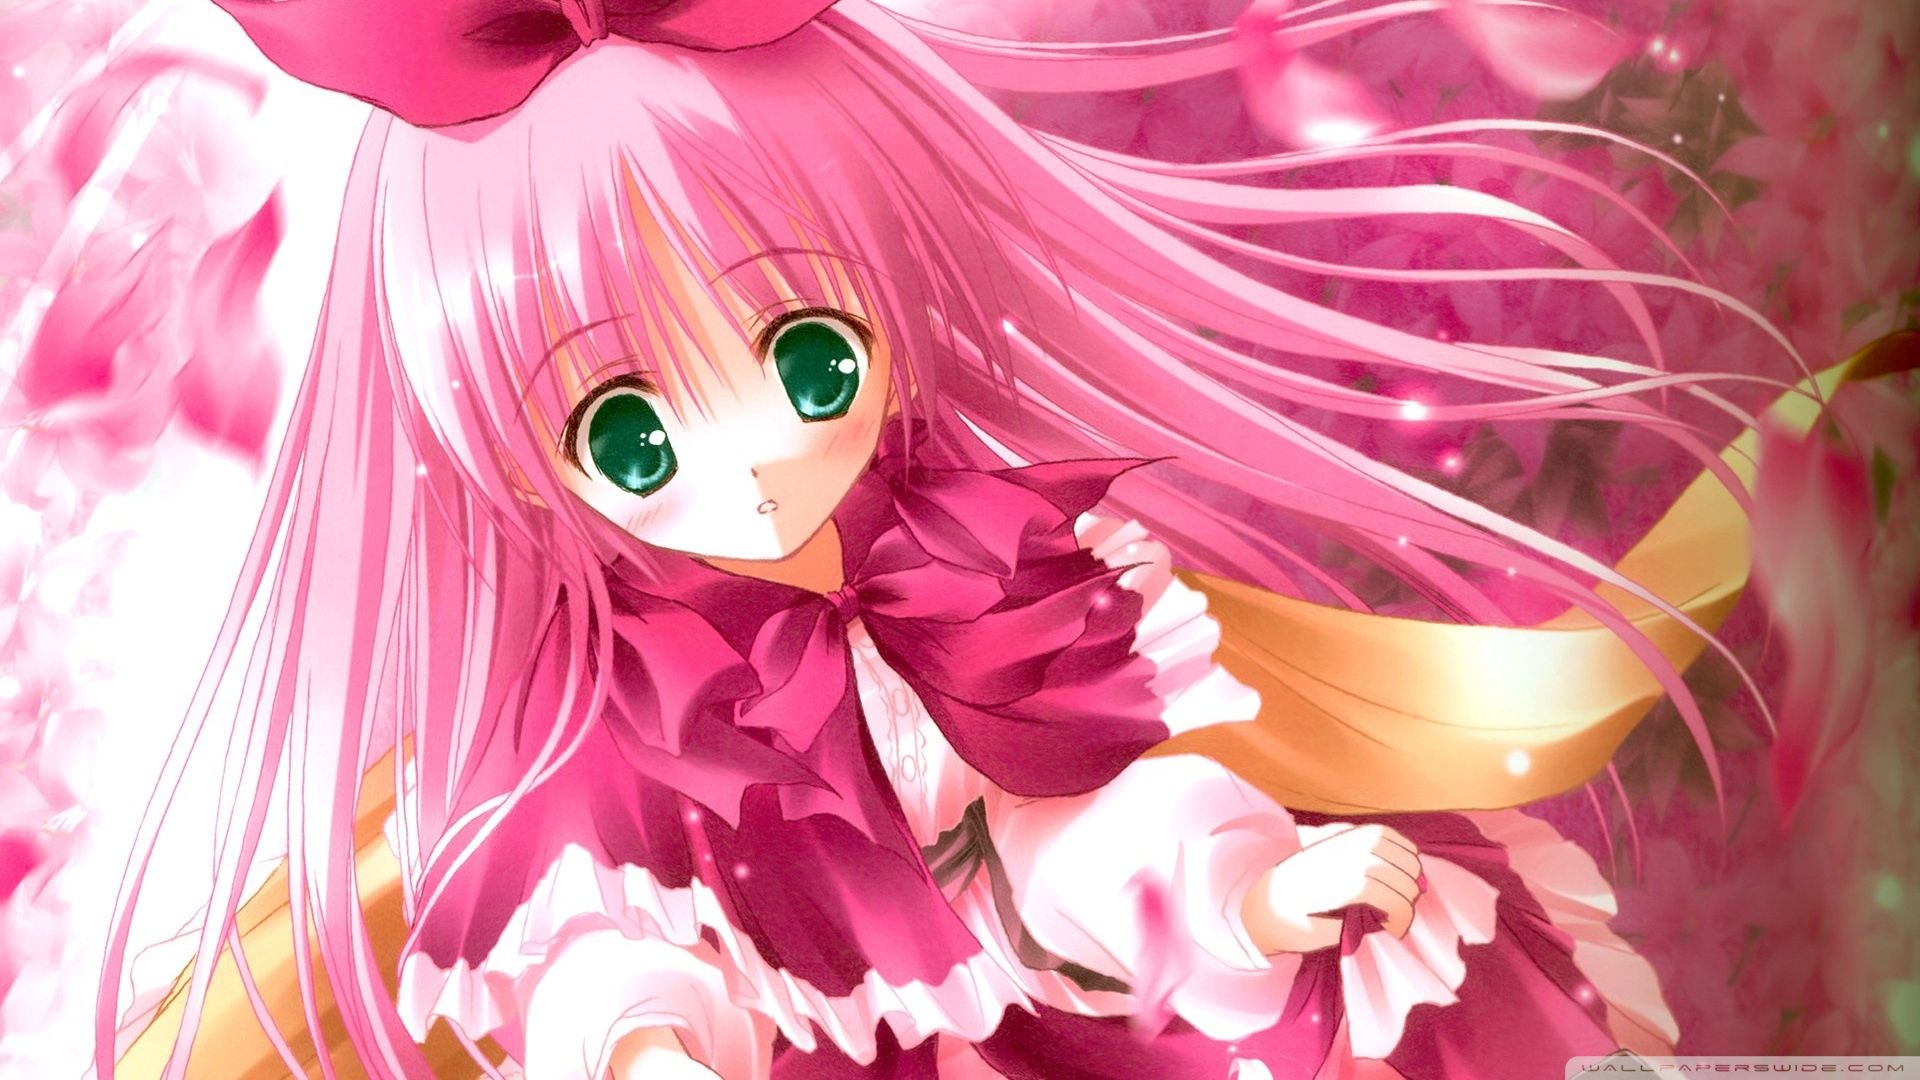 A pink haired anime girl in a pink dress with a pink bow in her hair - Pink anime